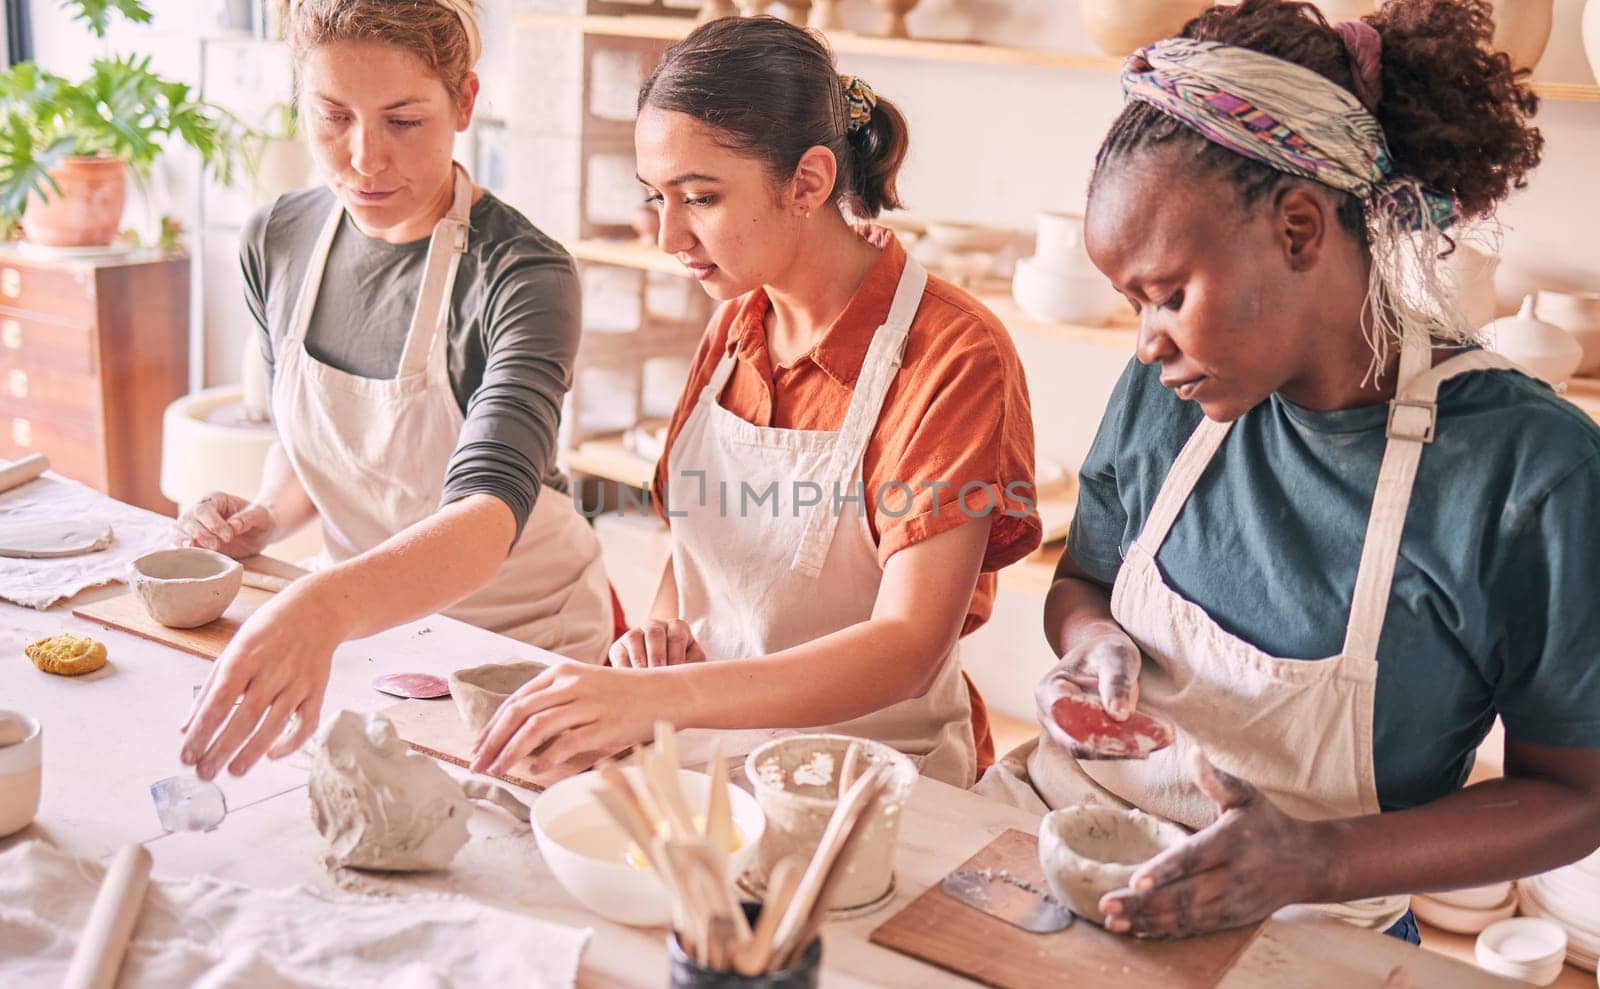 Pottery class, ceramic workshop or group design sculpture mold, clay manufacturing or art product. Diversity people, retail sales store or startup small business owner, artist or studio women molding by YuriArcurs